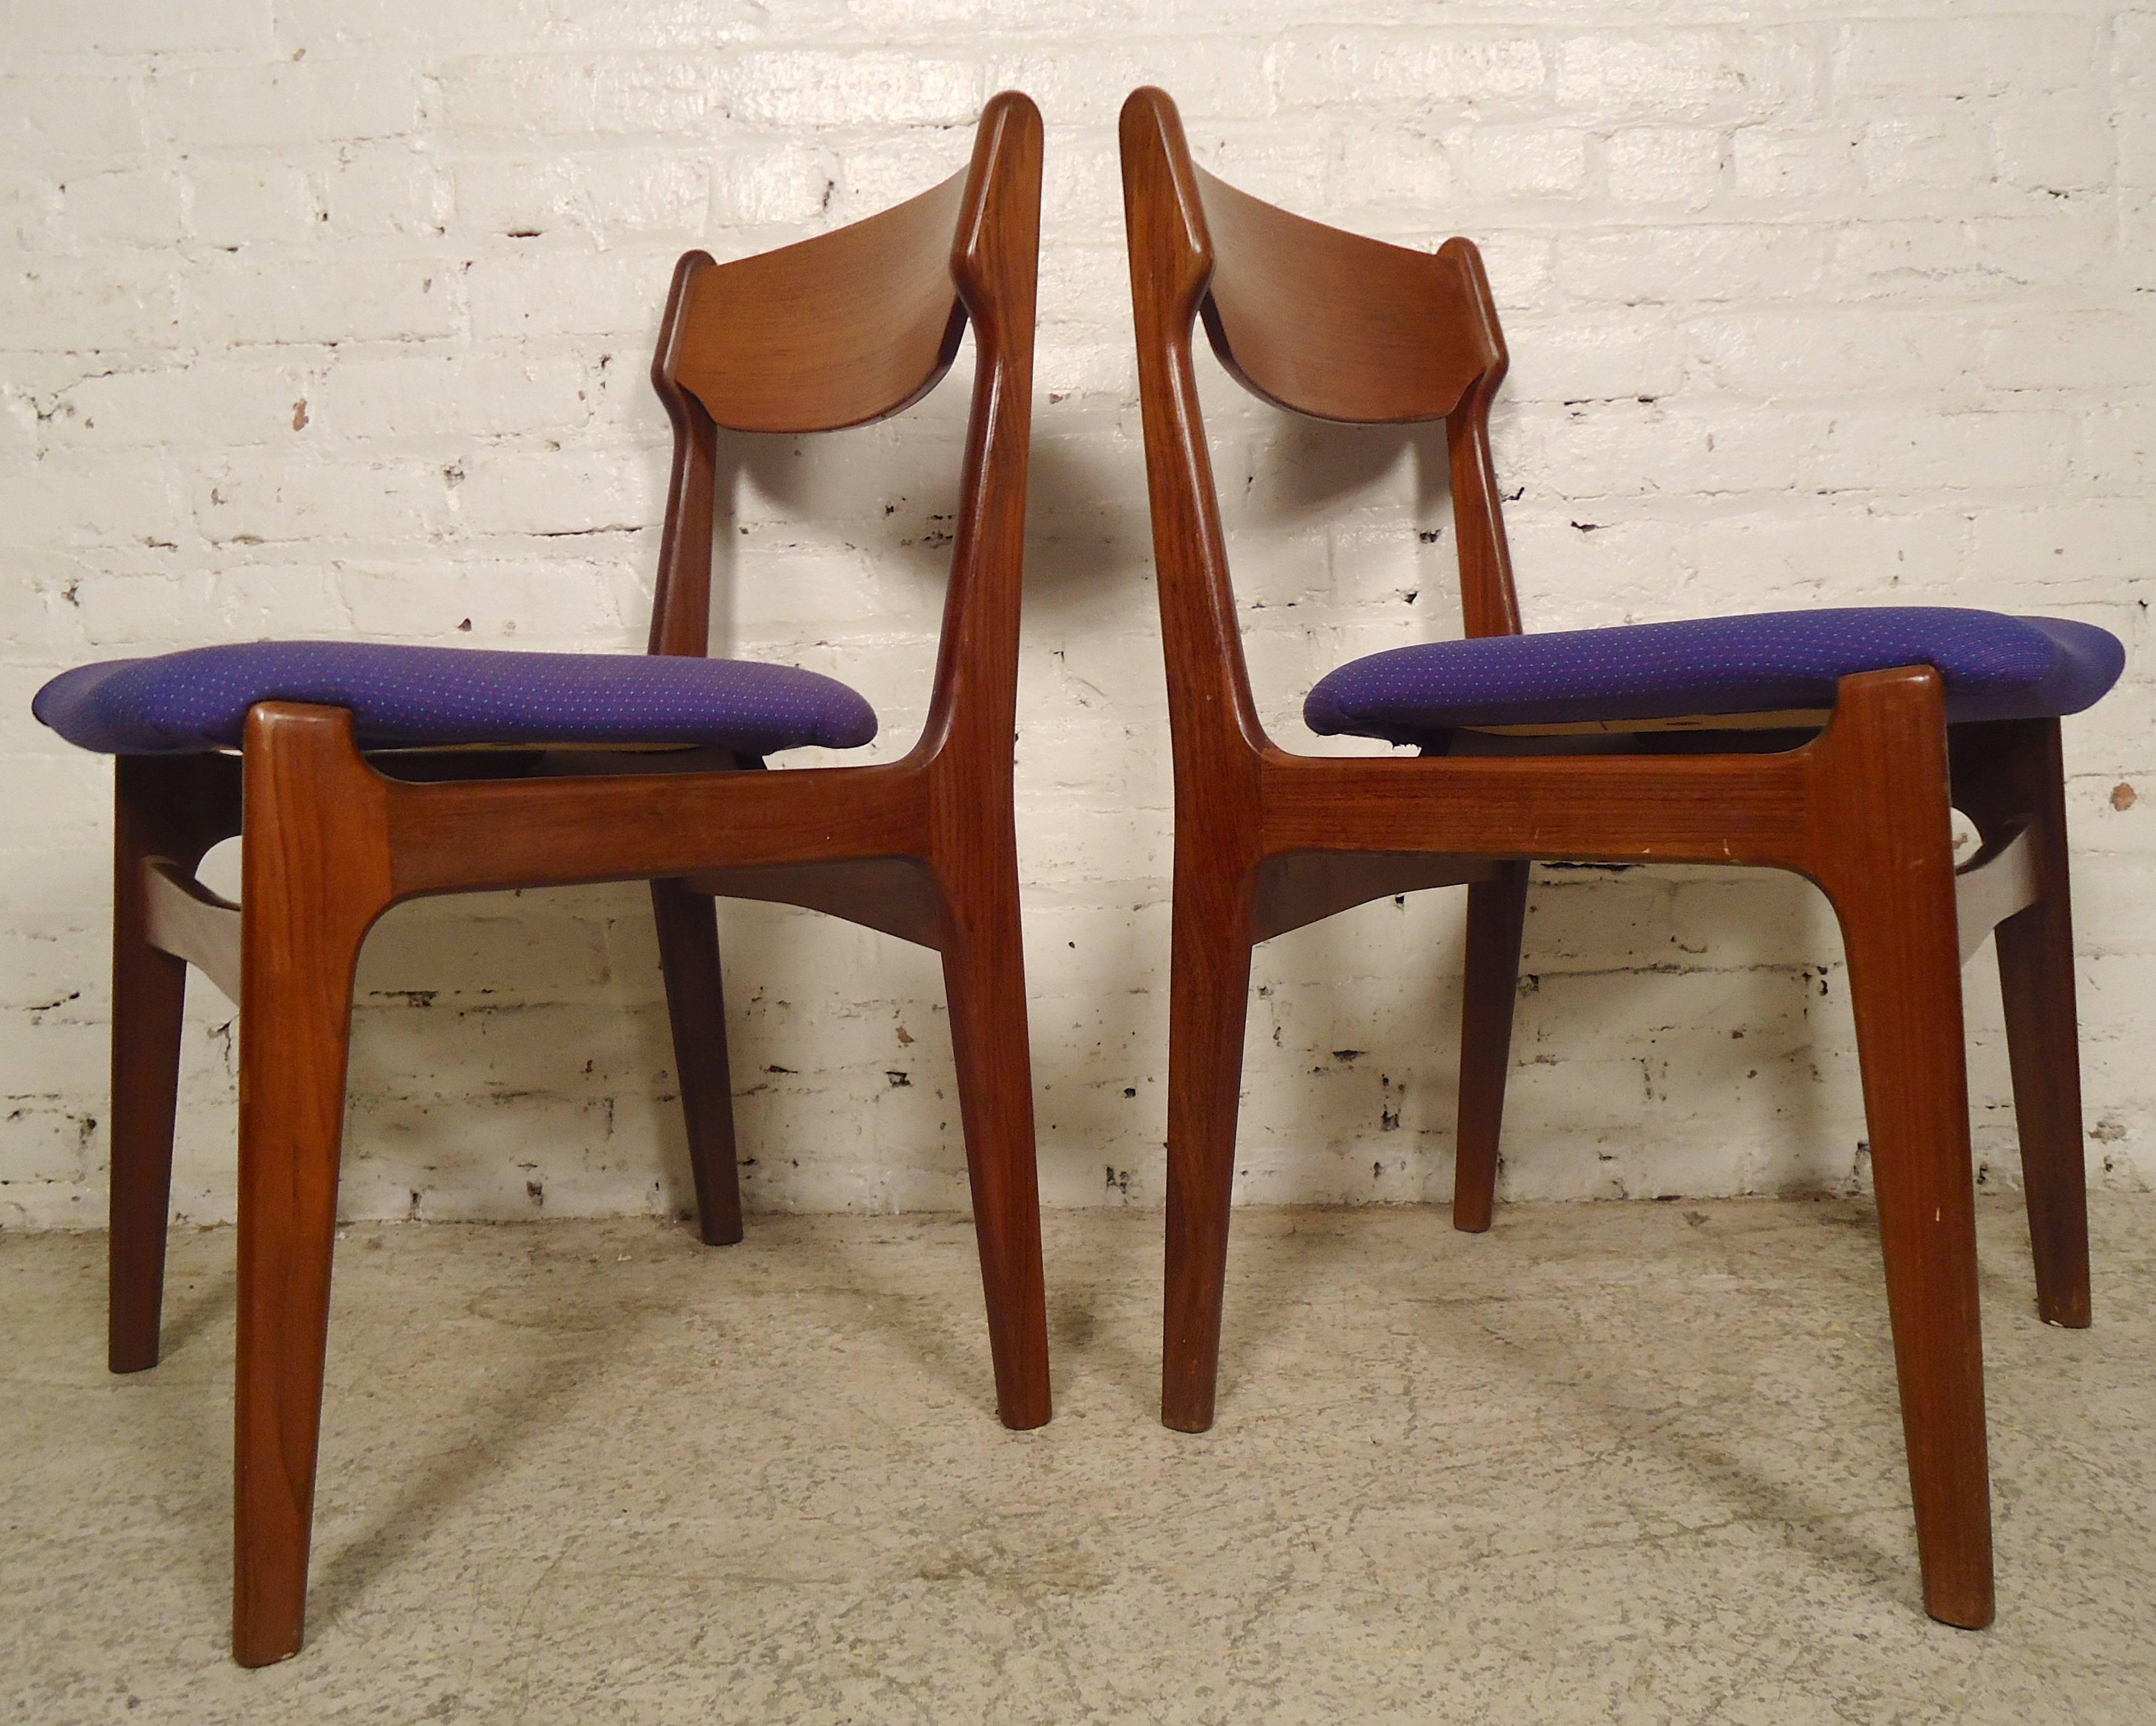 Six Mid-Century Modern teak chairs with upholstered seats and wood backs. Simple and elegant. Very easily recovered.

(Please confirm item location NY or NJ with dealer).
 